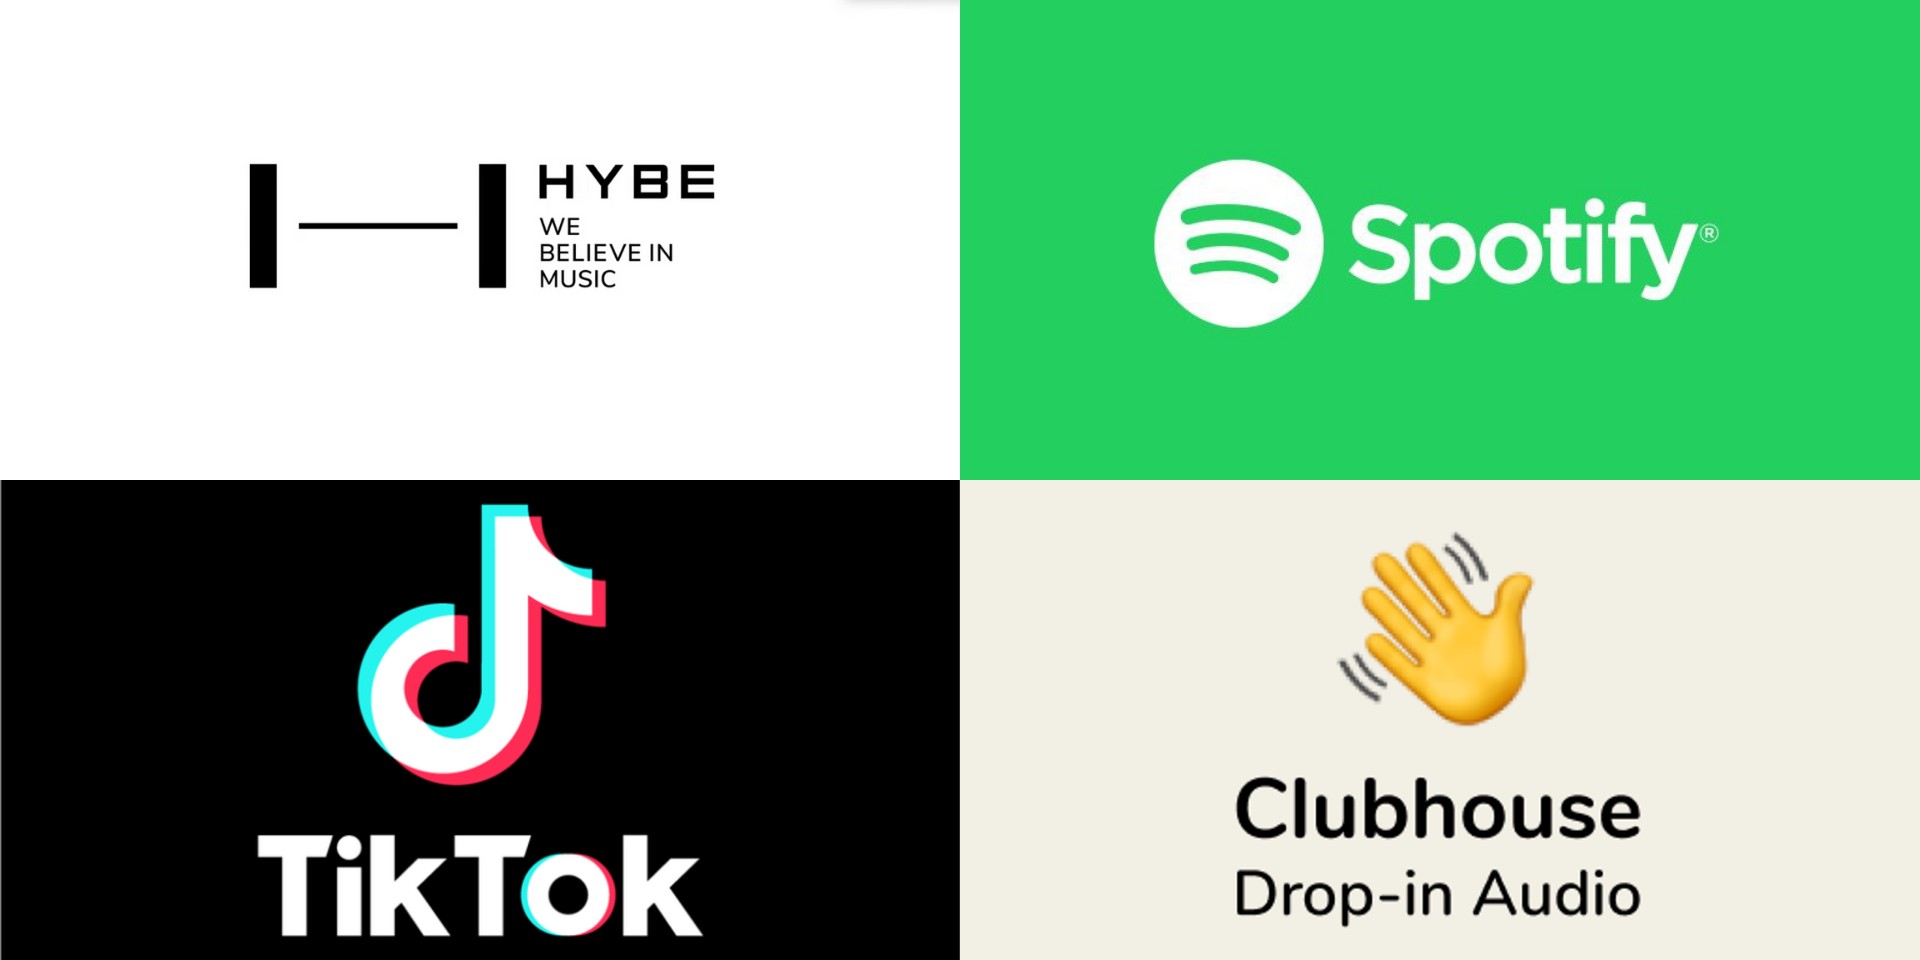 HYBE, TikTok, Twitter, Spotify, Clubhouse, and more make it onto TIME's 100 Most Influential Companies